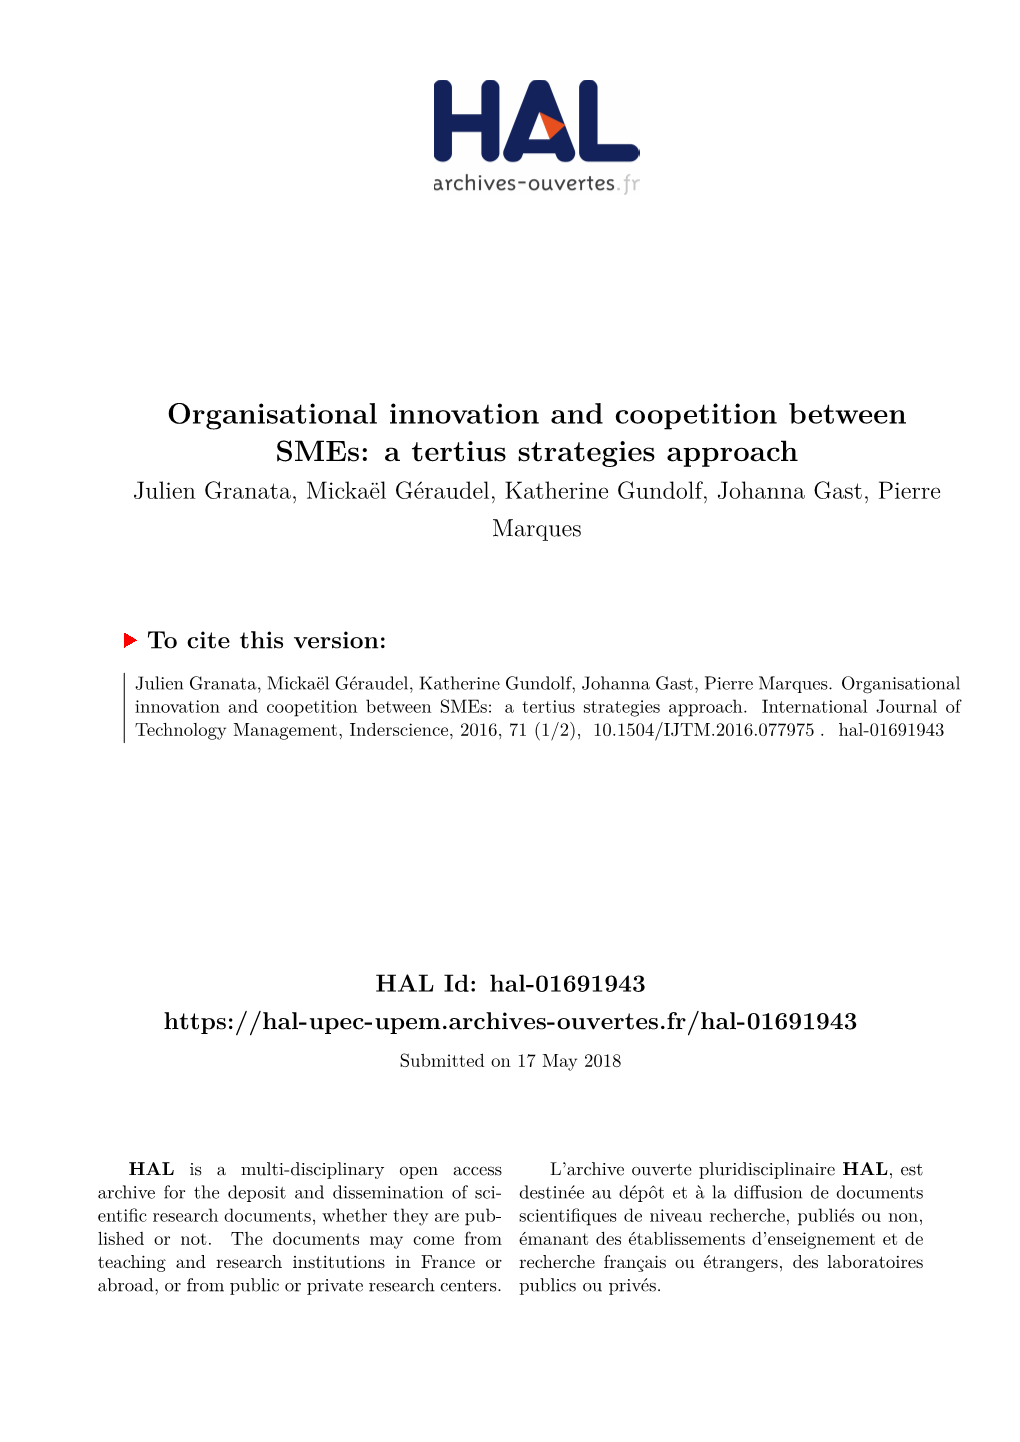 Organisational Innovation and Coopetition